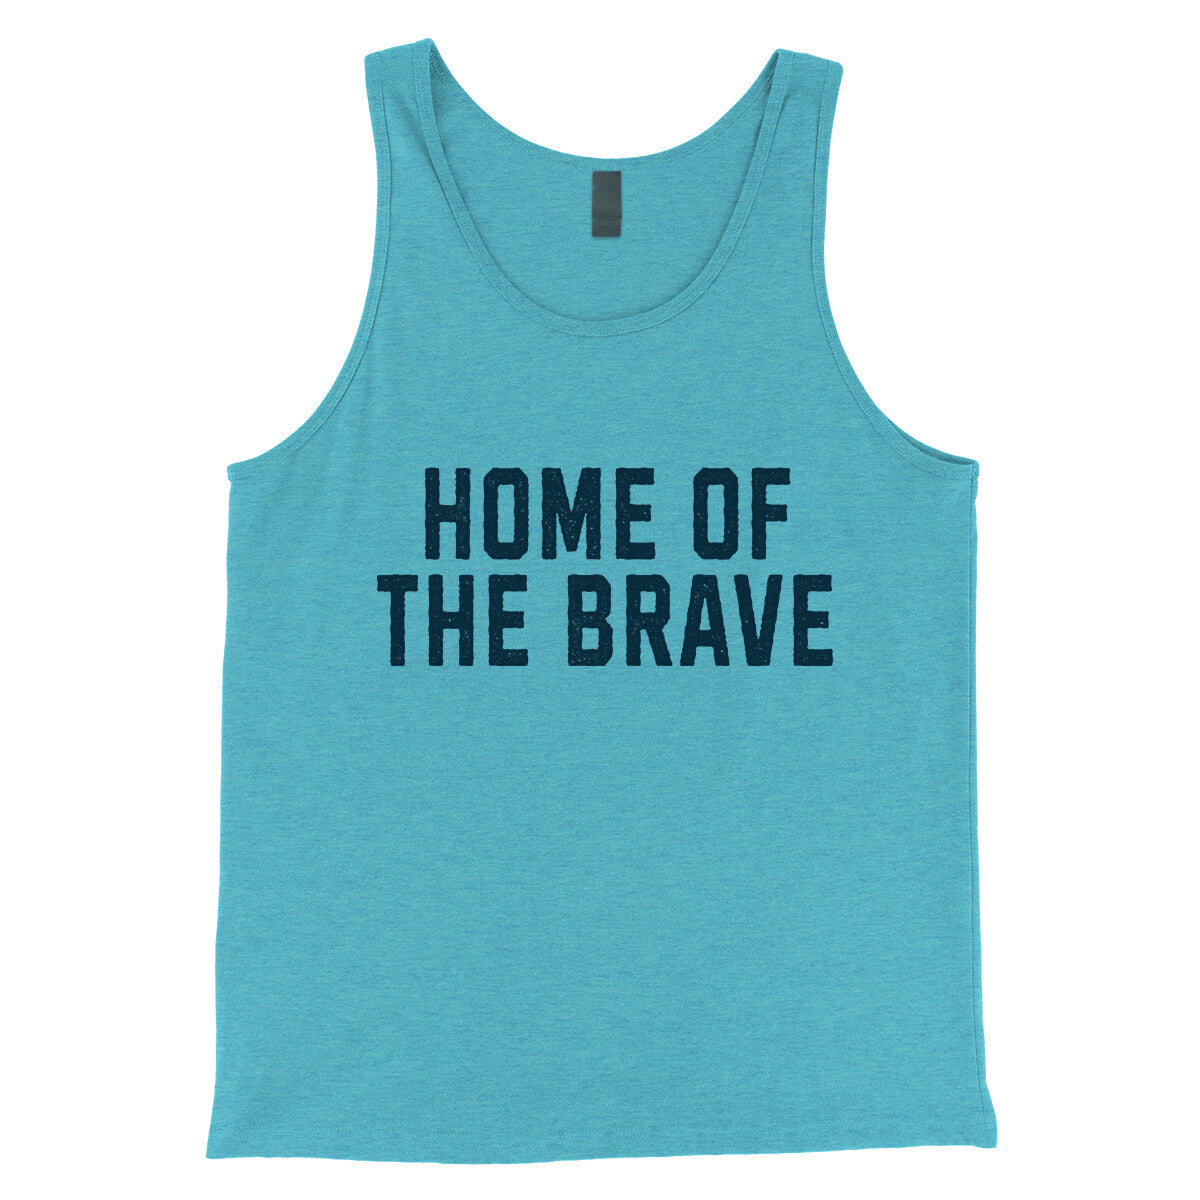 Home of the Brave in Aqua Triblend Color